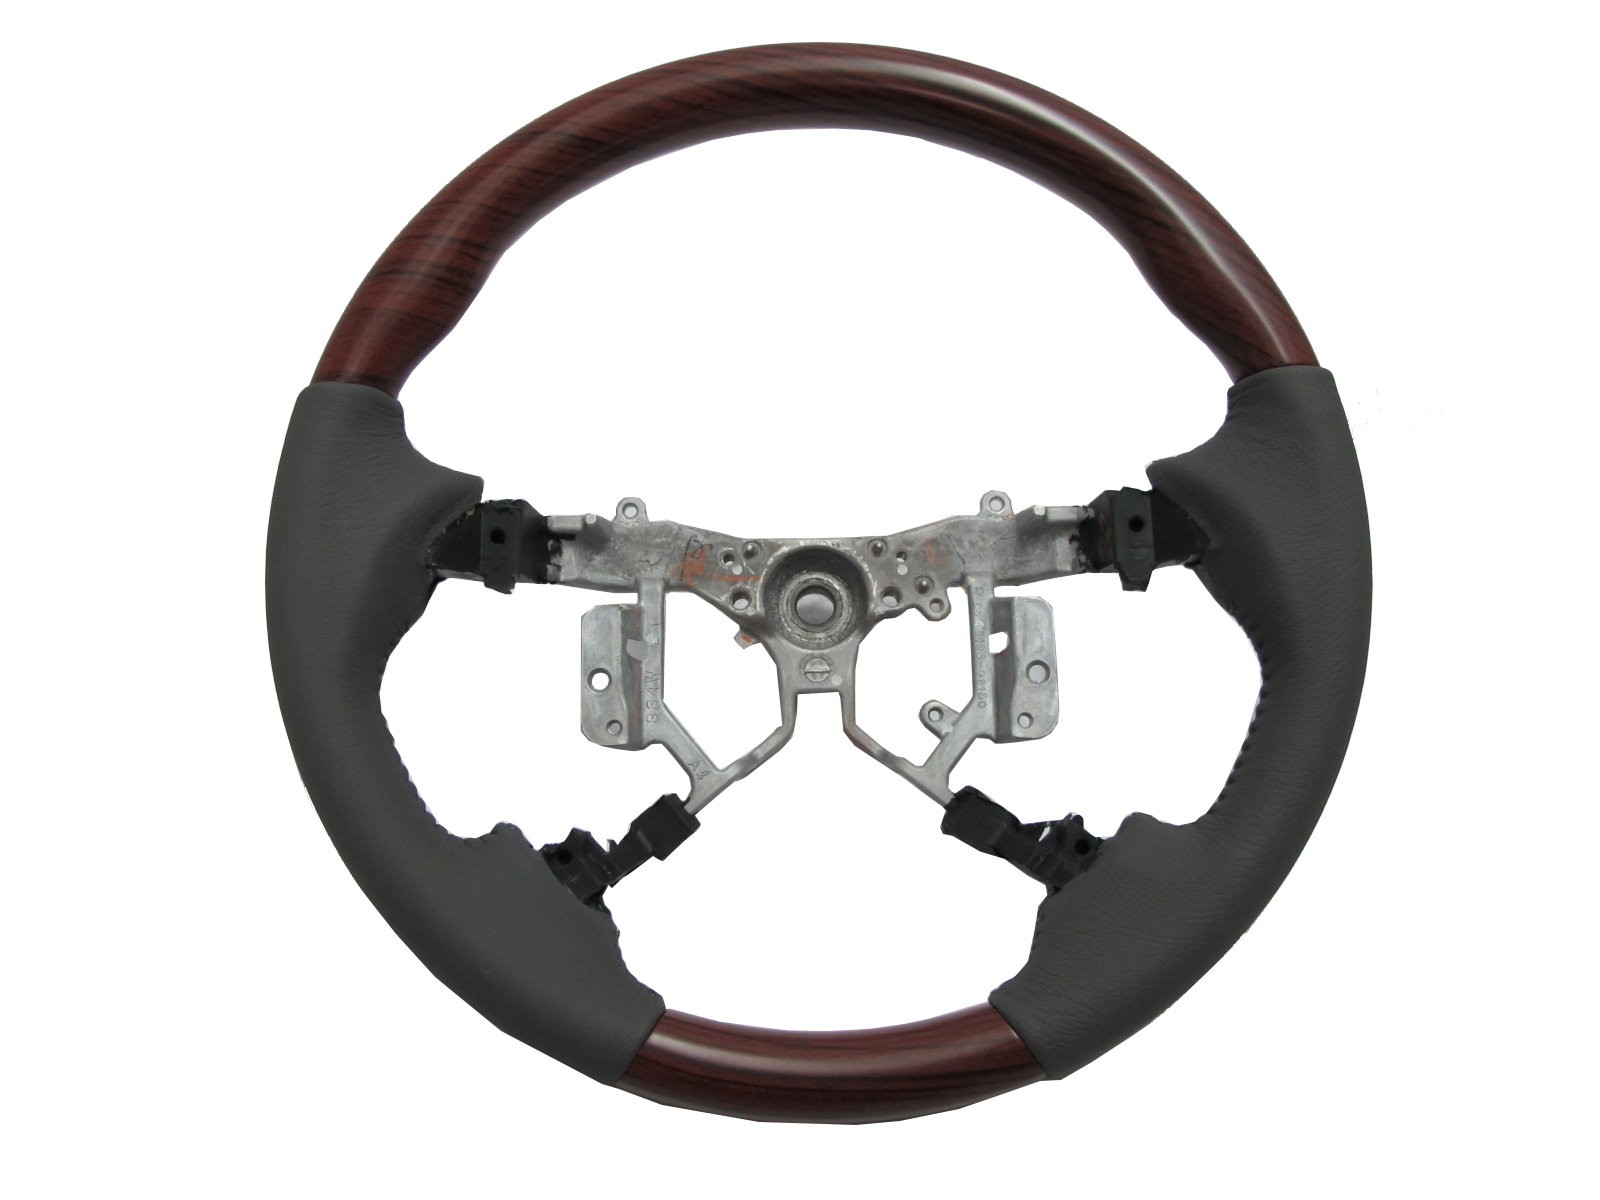 CrazyTheGod HILUX N70 2012-2014 STEERING WHEEL OE RED-WINE WOOD GRAY Leather for TOYOTA